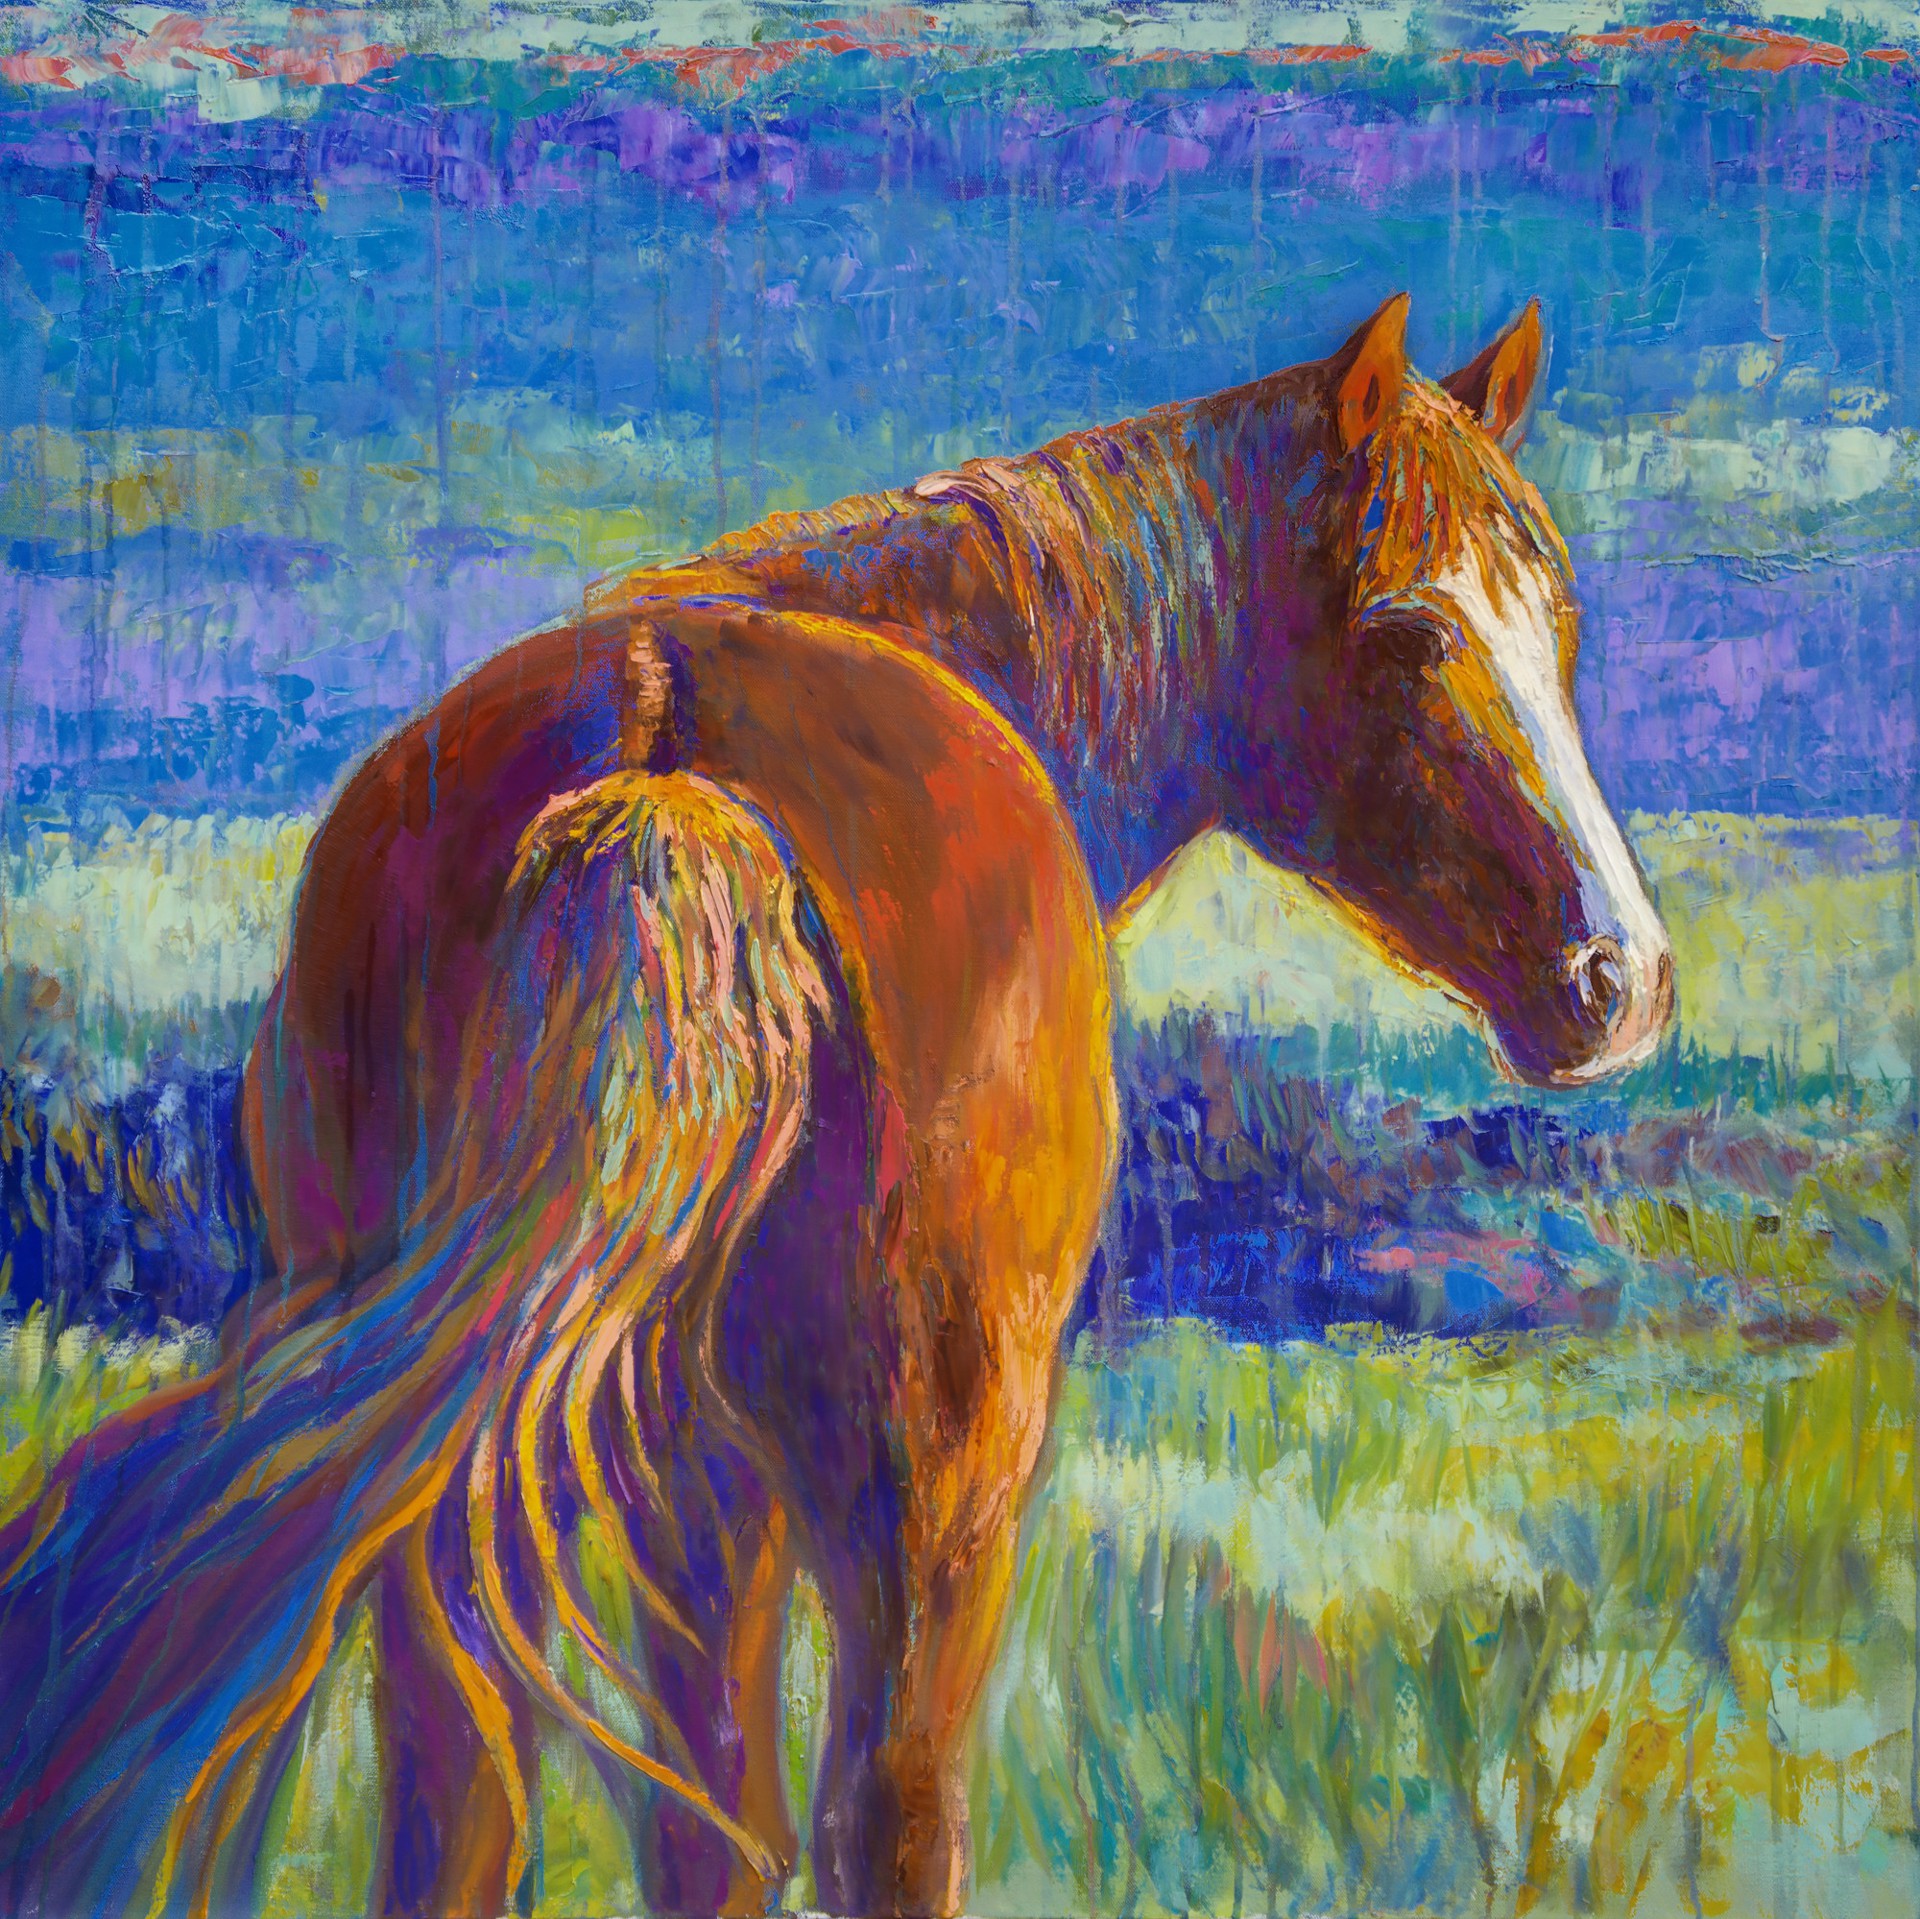 Shadowlands Solitaire ~“This horse is part of a herd of mustangs I was able to photograph last summer. I was struck by her quiet confidence as she looked towards the sunset, with the deepening shadows behind her. “ Meikle by Barbara Meikle